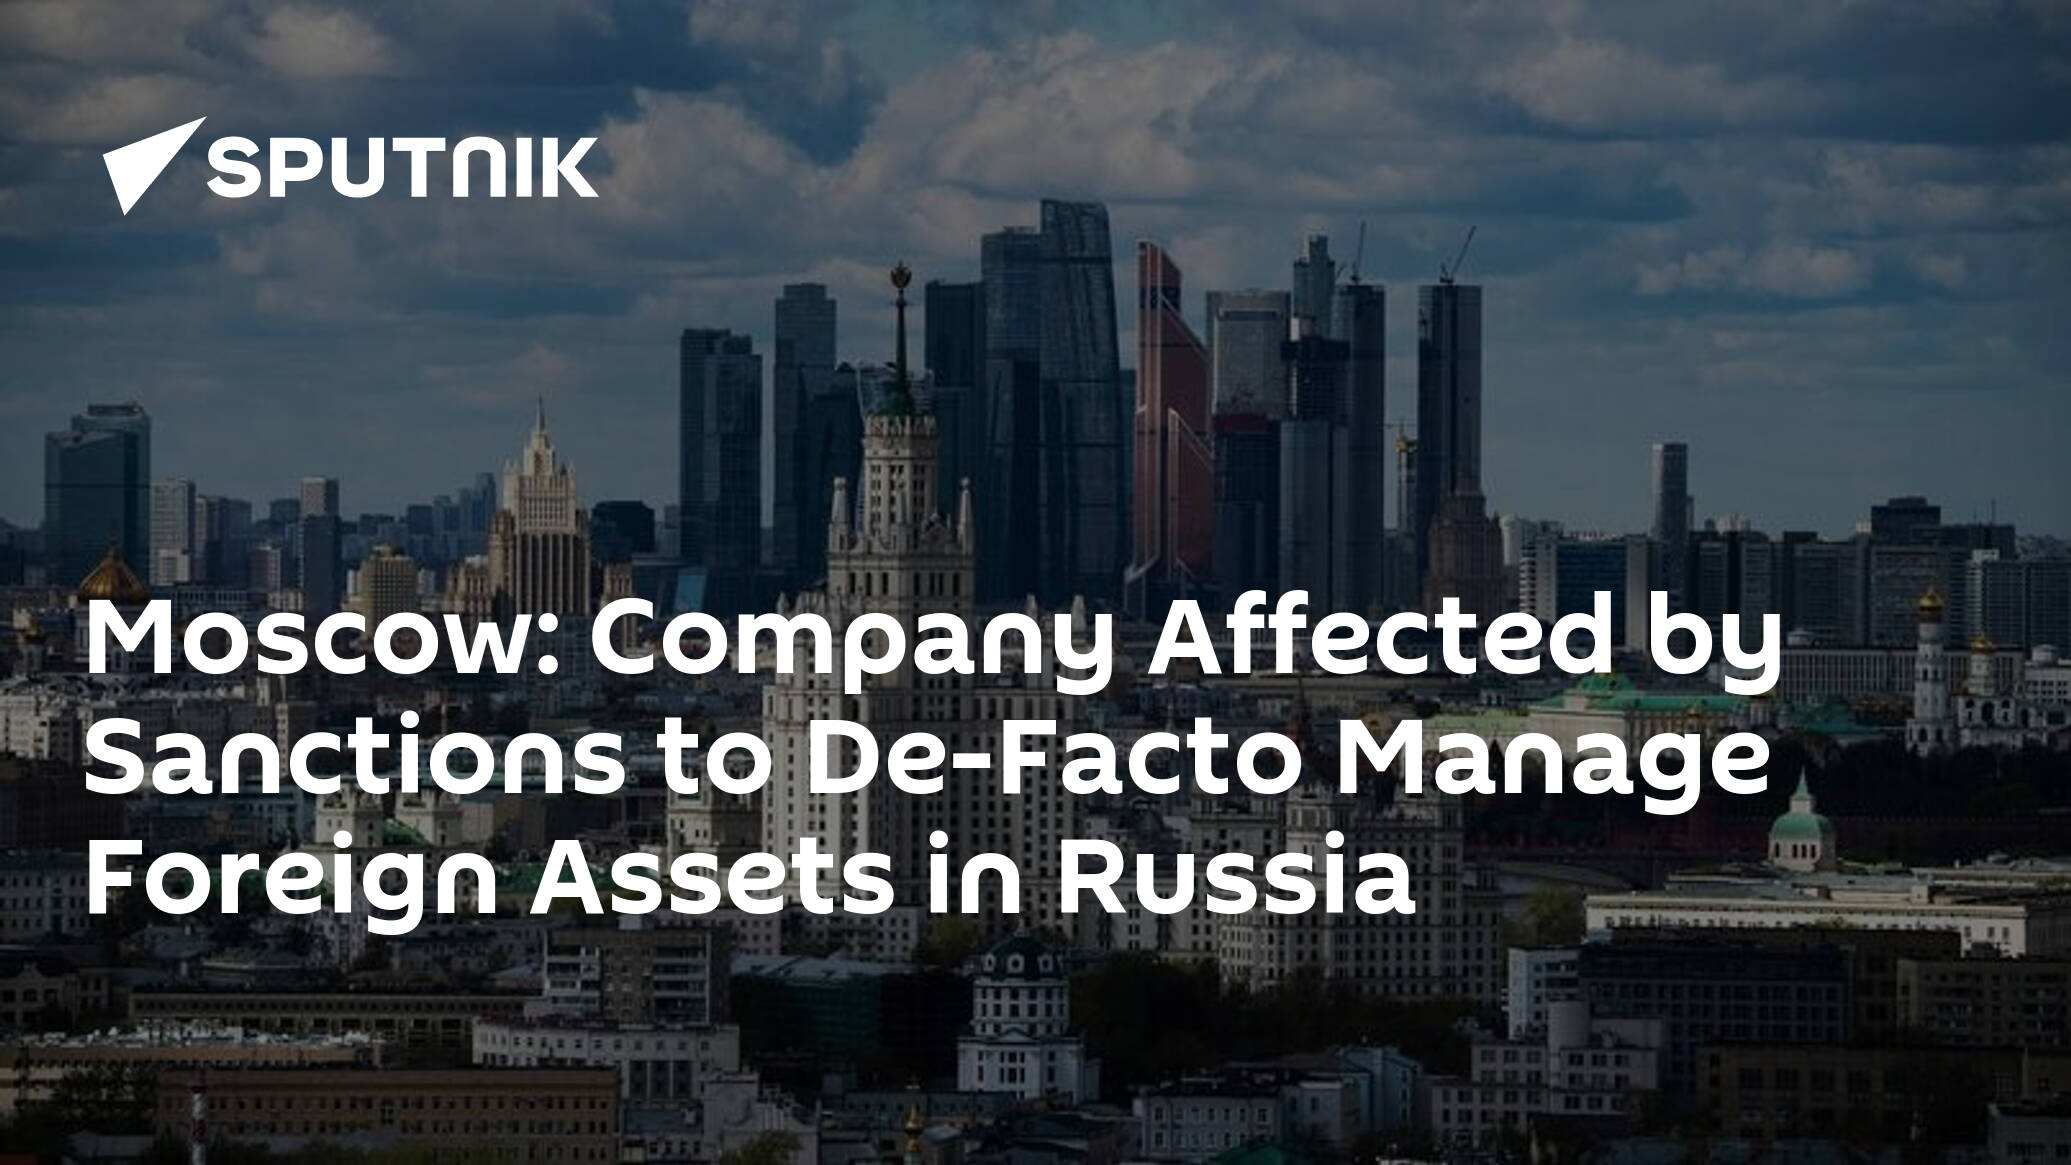 Moscow: Company Affected by Sanctions to De-Facto Manage Foreign Assets in Russia